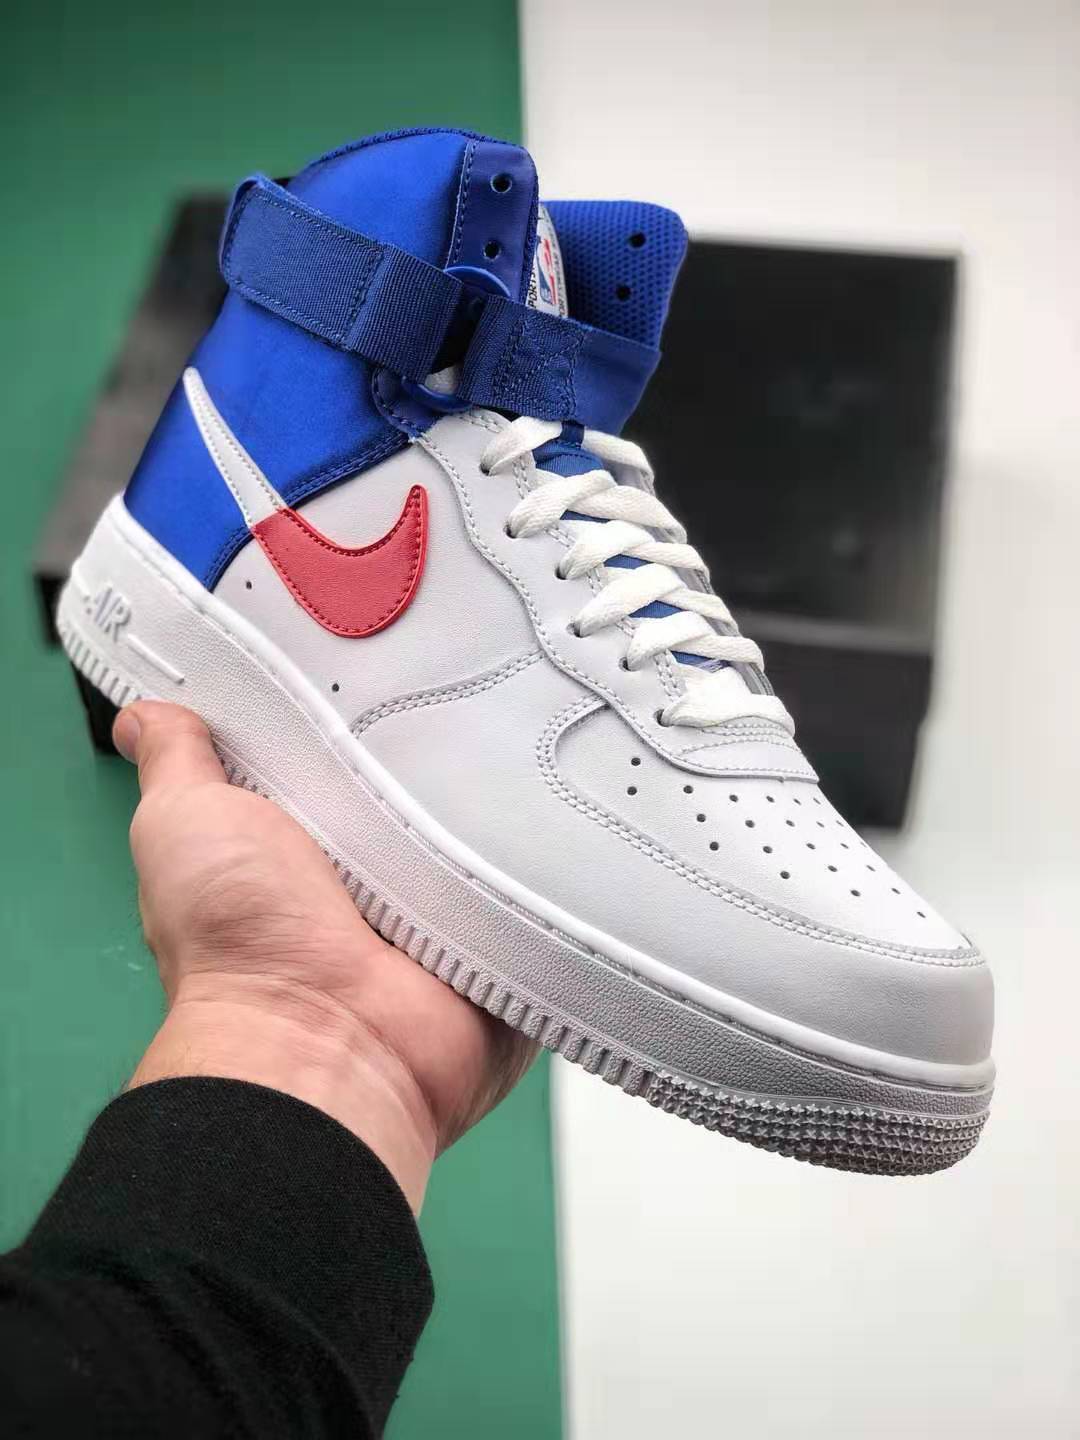 Nike NBA x Air Force 1 High '07 Clippers BQ4591-102 - Shop Now for the Ultimate Basketball Sneaker!